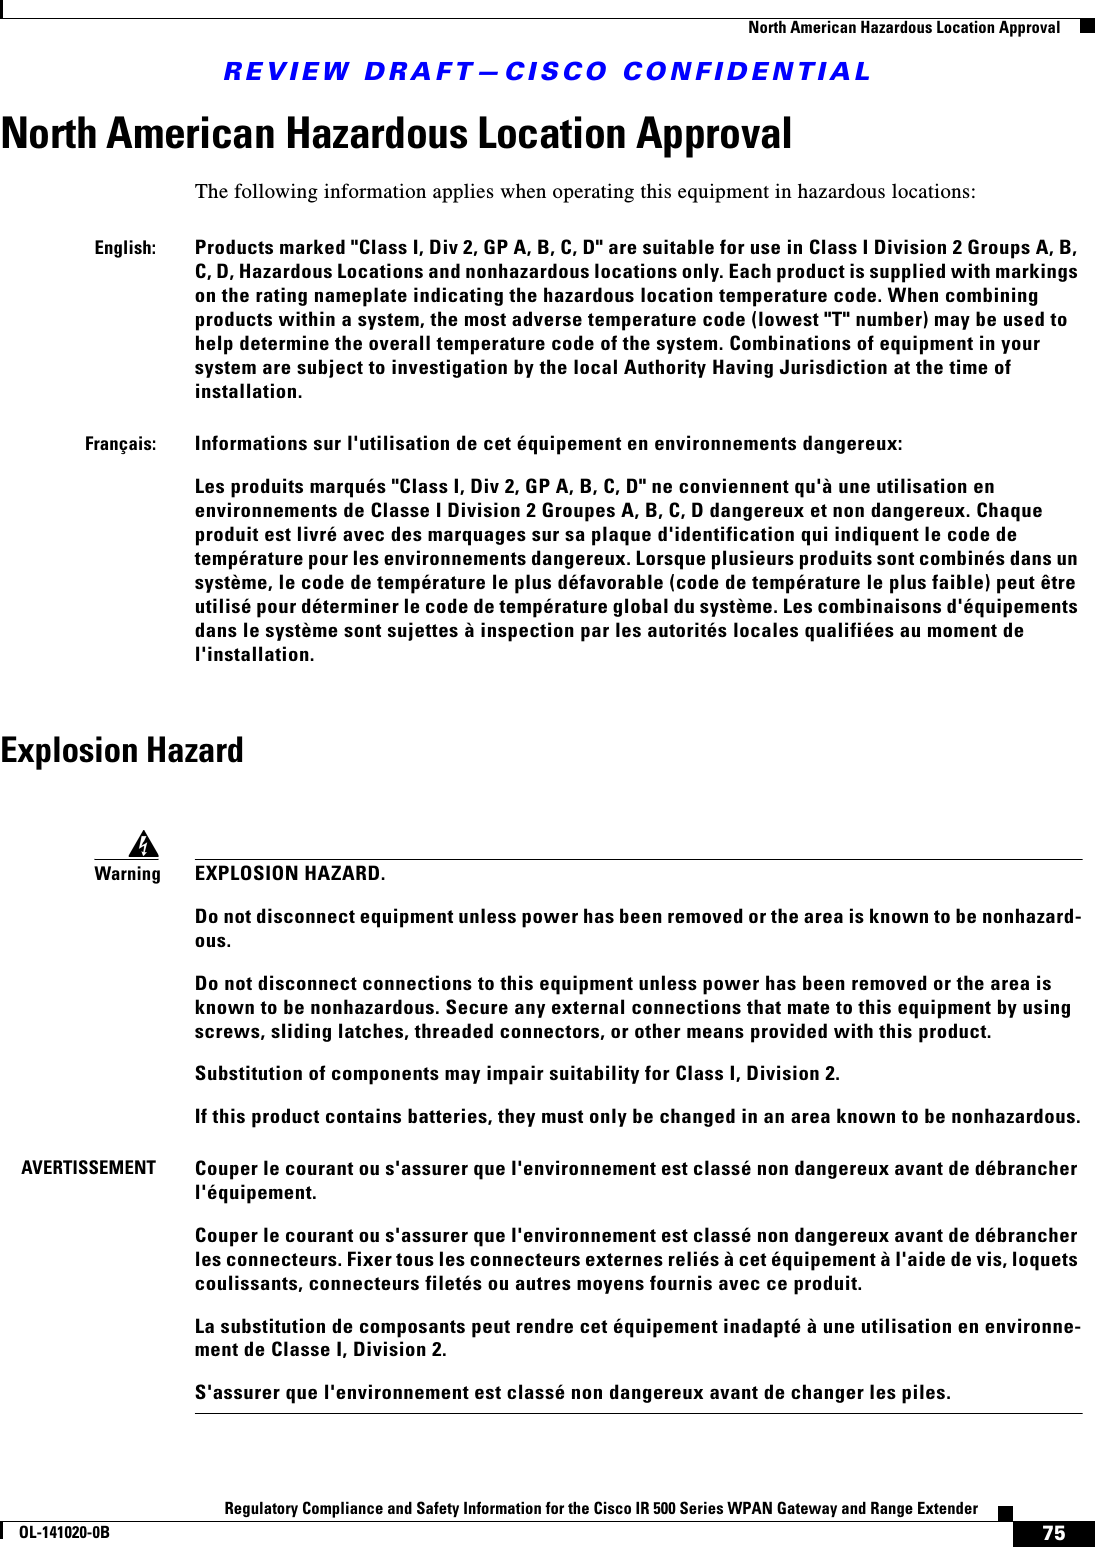 REVIEW DRAFT—CISCO CONFIDENTIAL75Regulatory Compliance and Safety Information for the Cisco IR 500 Series WPAN Gateway and Range ExtenderOL-141020-0B  North American Hazardous Location ApprovalNorth American Hazardous Location ApprovalThe following information applies when operating this equipment in hazardous locations:Explosion HazardEnglish:Products marked &quot;Class I, Div 2, GP A, B, C, D&quot; are suitable for use in Class I Division 2 Groups A, B, C, D, Hazardous Locations and nonhazardous locations only. Each product is supplied with markings on the rating nameplate indicating the hazardous location temperature code. When combining products within a system, the most adverse temperature code (lowest &quot;T&quot; number) may be used to help determine the overall temperature code of the system. Combinations of equipment in your system are subject to investigation by the local Authority Having Jurisdiction at the time of installation.Français:Informations sur l&apos;utilisation de cet équipement en environnements dangereux:Les produits marqués &quot;Class I, Div 2, GP A, B, C, D&quot; ne conviennent qu&apos;à une utilisation en environnements de Classe I Division 2 Groupes A, B, C, D dangereux et non dangereux. Chaque produit est livré avec des marquages sur sa plaque d&apos;identification qui indiquent le code de température pour les environnements dangereux. Lorsque plusieurs produits sont combinés dans un système, le code de température le plus défavorable (code de température le plus faible) peut être utilisé pour déterminer le code de température global du système. Les combinaisons d&apos;équipements dans le système sont sujettes à inspection par les autorités locales qualifiées au moment de l&apos;installation.WarningEXPLOSION HAZARD.Do not disconnect equipment unless power has been removed or the area is known to be nonhazard-ous.Do not disconnect connections to this equipment unless power has been removed or the area is known to be nonhazardous. Secure any external connections that mate to this equipment by using screws, sliding latches, threaded connectors, or other means provided with this product.Substitution of components may impair suitability for Class I, Division 2.If this product contains batteries, they must only be changed in an area known to be nonhazardous.AVERTISSEMENTCouper le courant ou s&apos;assurer que l&apos;environnement est classé non dangereux avant de débrancher l&apos;équipement.Couper le courant ou s&apos;assurer que l&apos;environnement est classé non dangereux avant de débrancher les connecteurs. Fixer tous les connecteurs externes reliés à cet équipement à l&apos;aide de vis, loquets coulissants, connecteurs filetés ou autres moyens fournis avec ce produit.La substitution de composants peut rendre cet équipement inadapté à une utilisation en environne-ment de Classe I, Division 2.S&apos;assurer que l&apos;environnement est classé non dangereux avant de changer les piles.